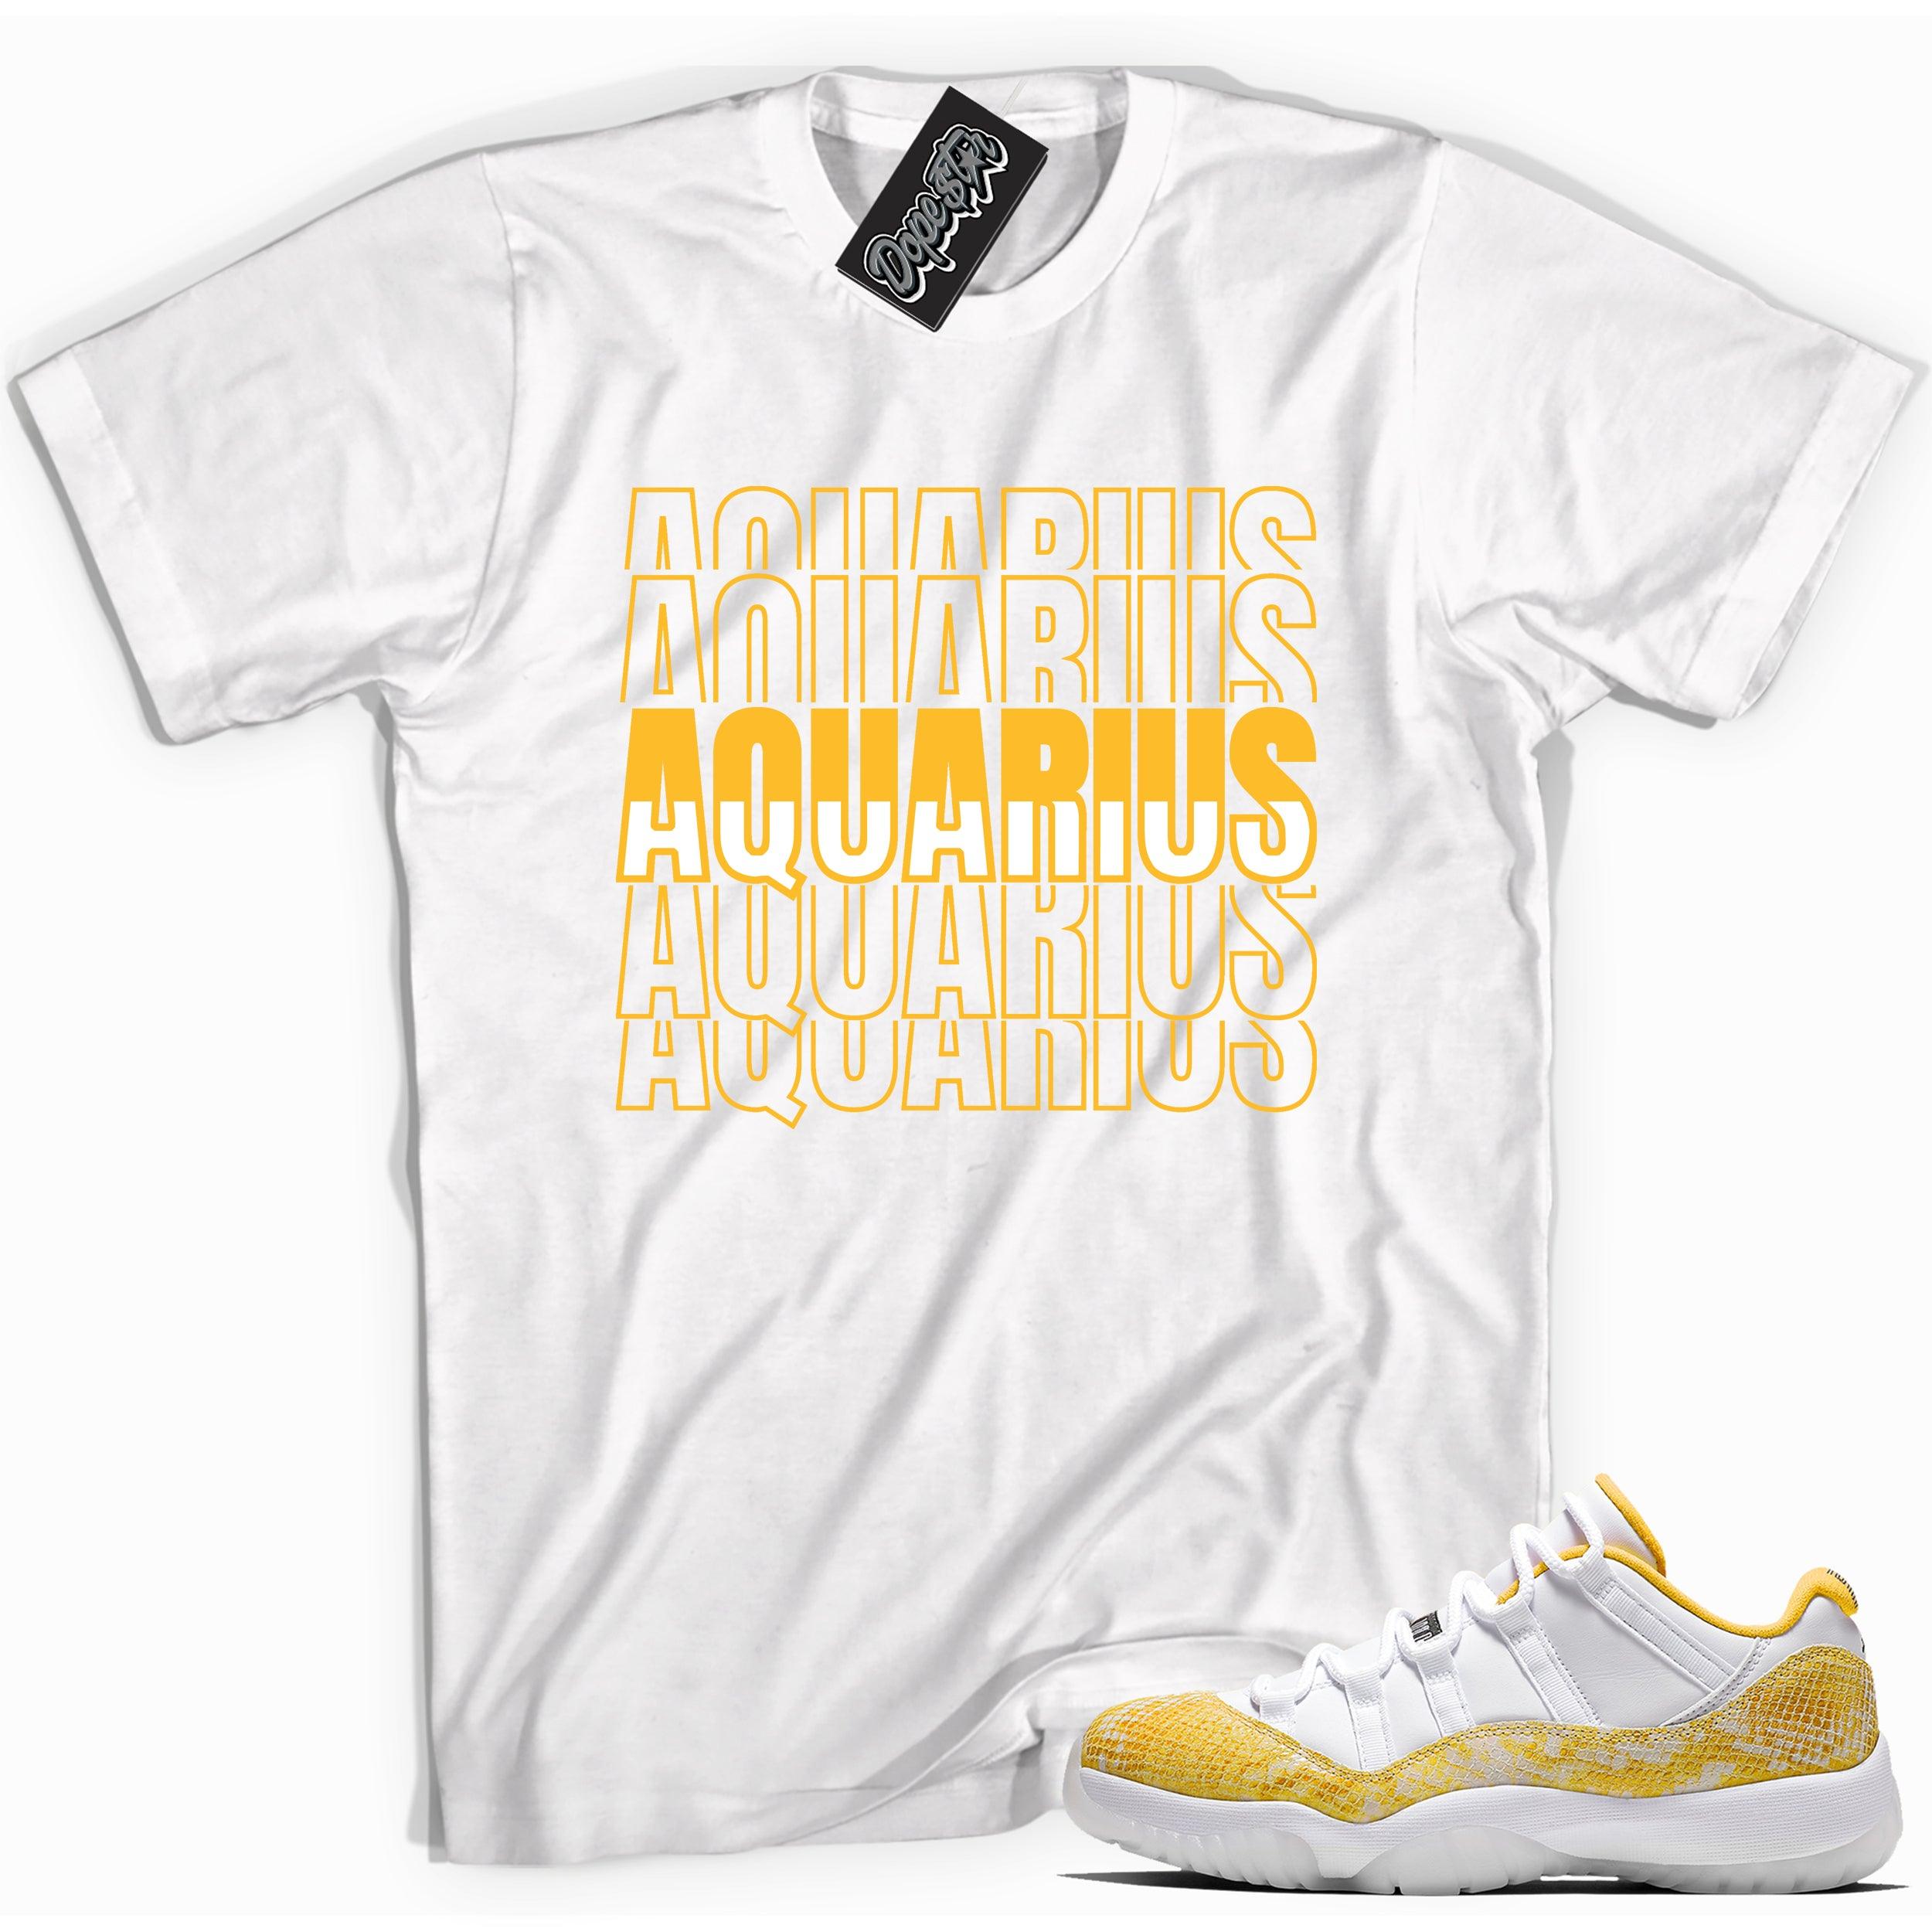 Cool white graphic tee with 'aquarius' print, that perfectly matches Air Jordan 11 Retro Low Yellow Snakeskin sneakers